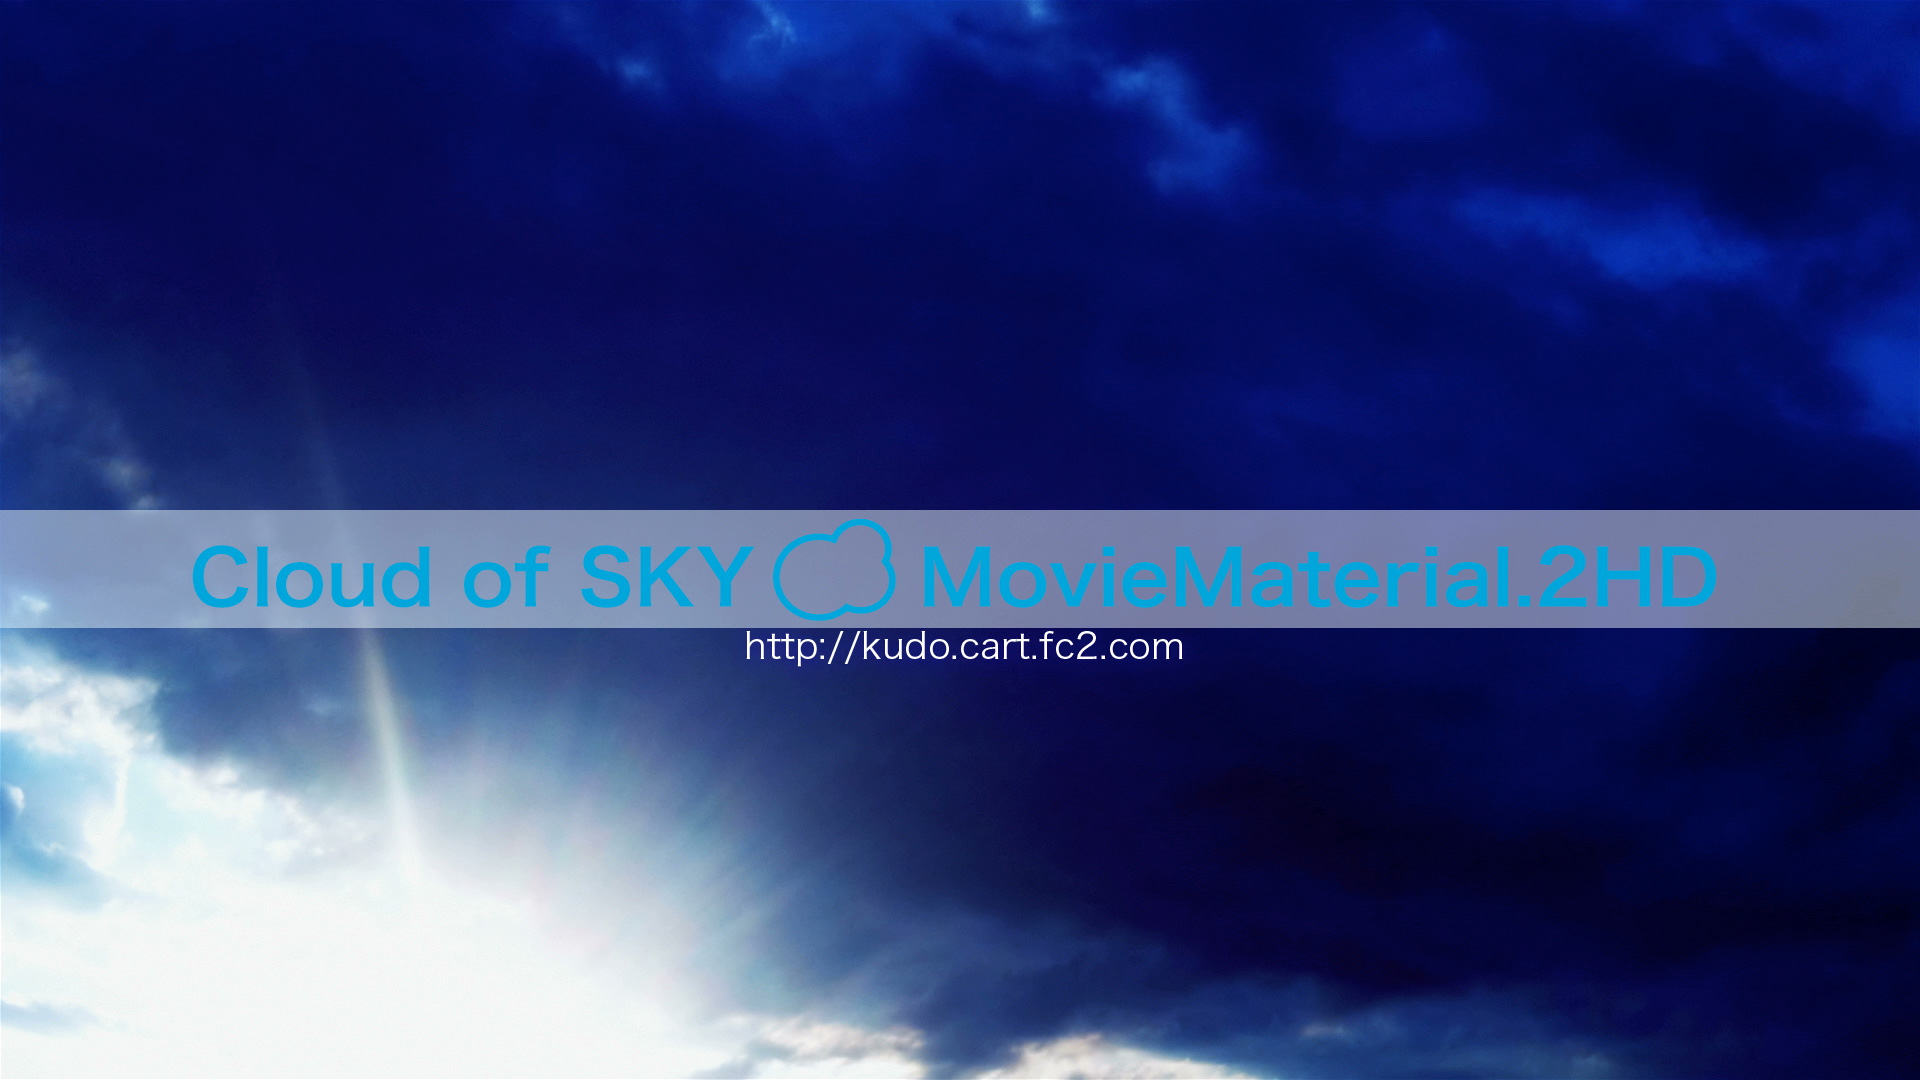 【Cloud of SKY MovieMaterial.HDSET】 ロイヤリティフリー フルハイビジョン動画素材集 Image.4